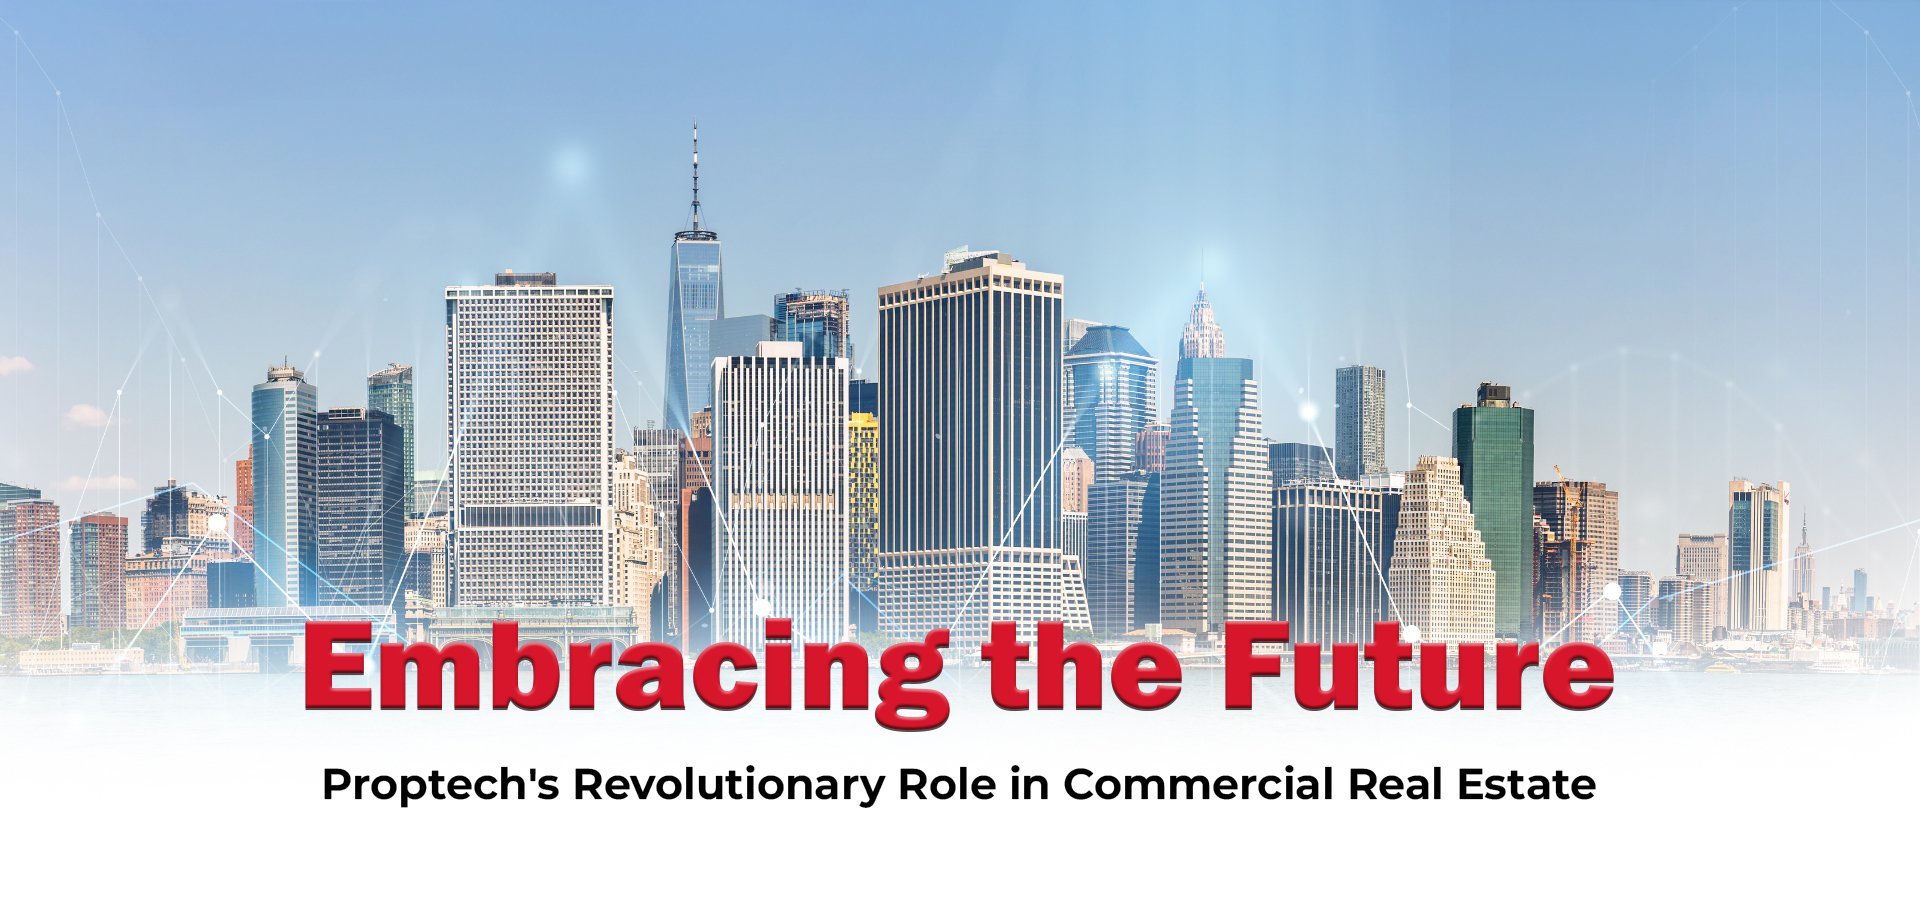 Proptechs_Revolutionary_Role_in_Commercial_Real_Estate_copy